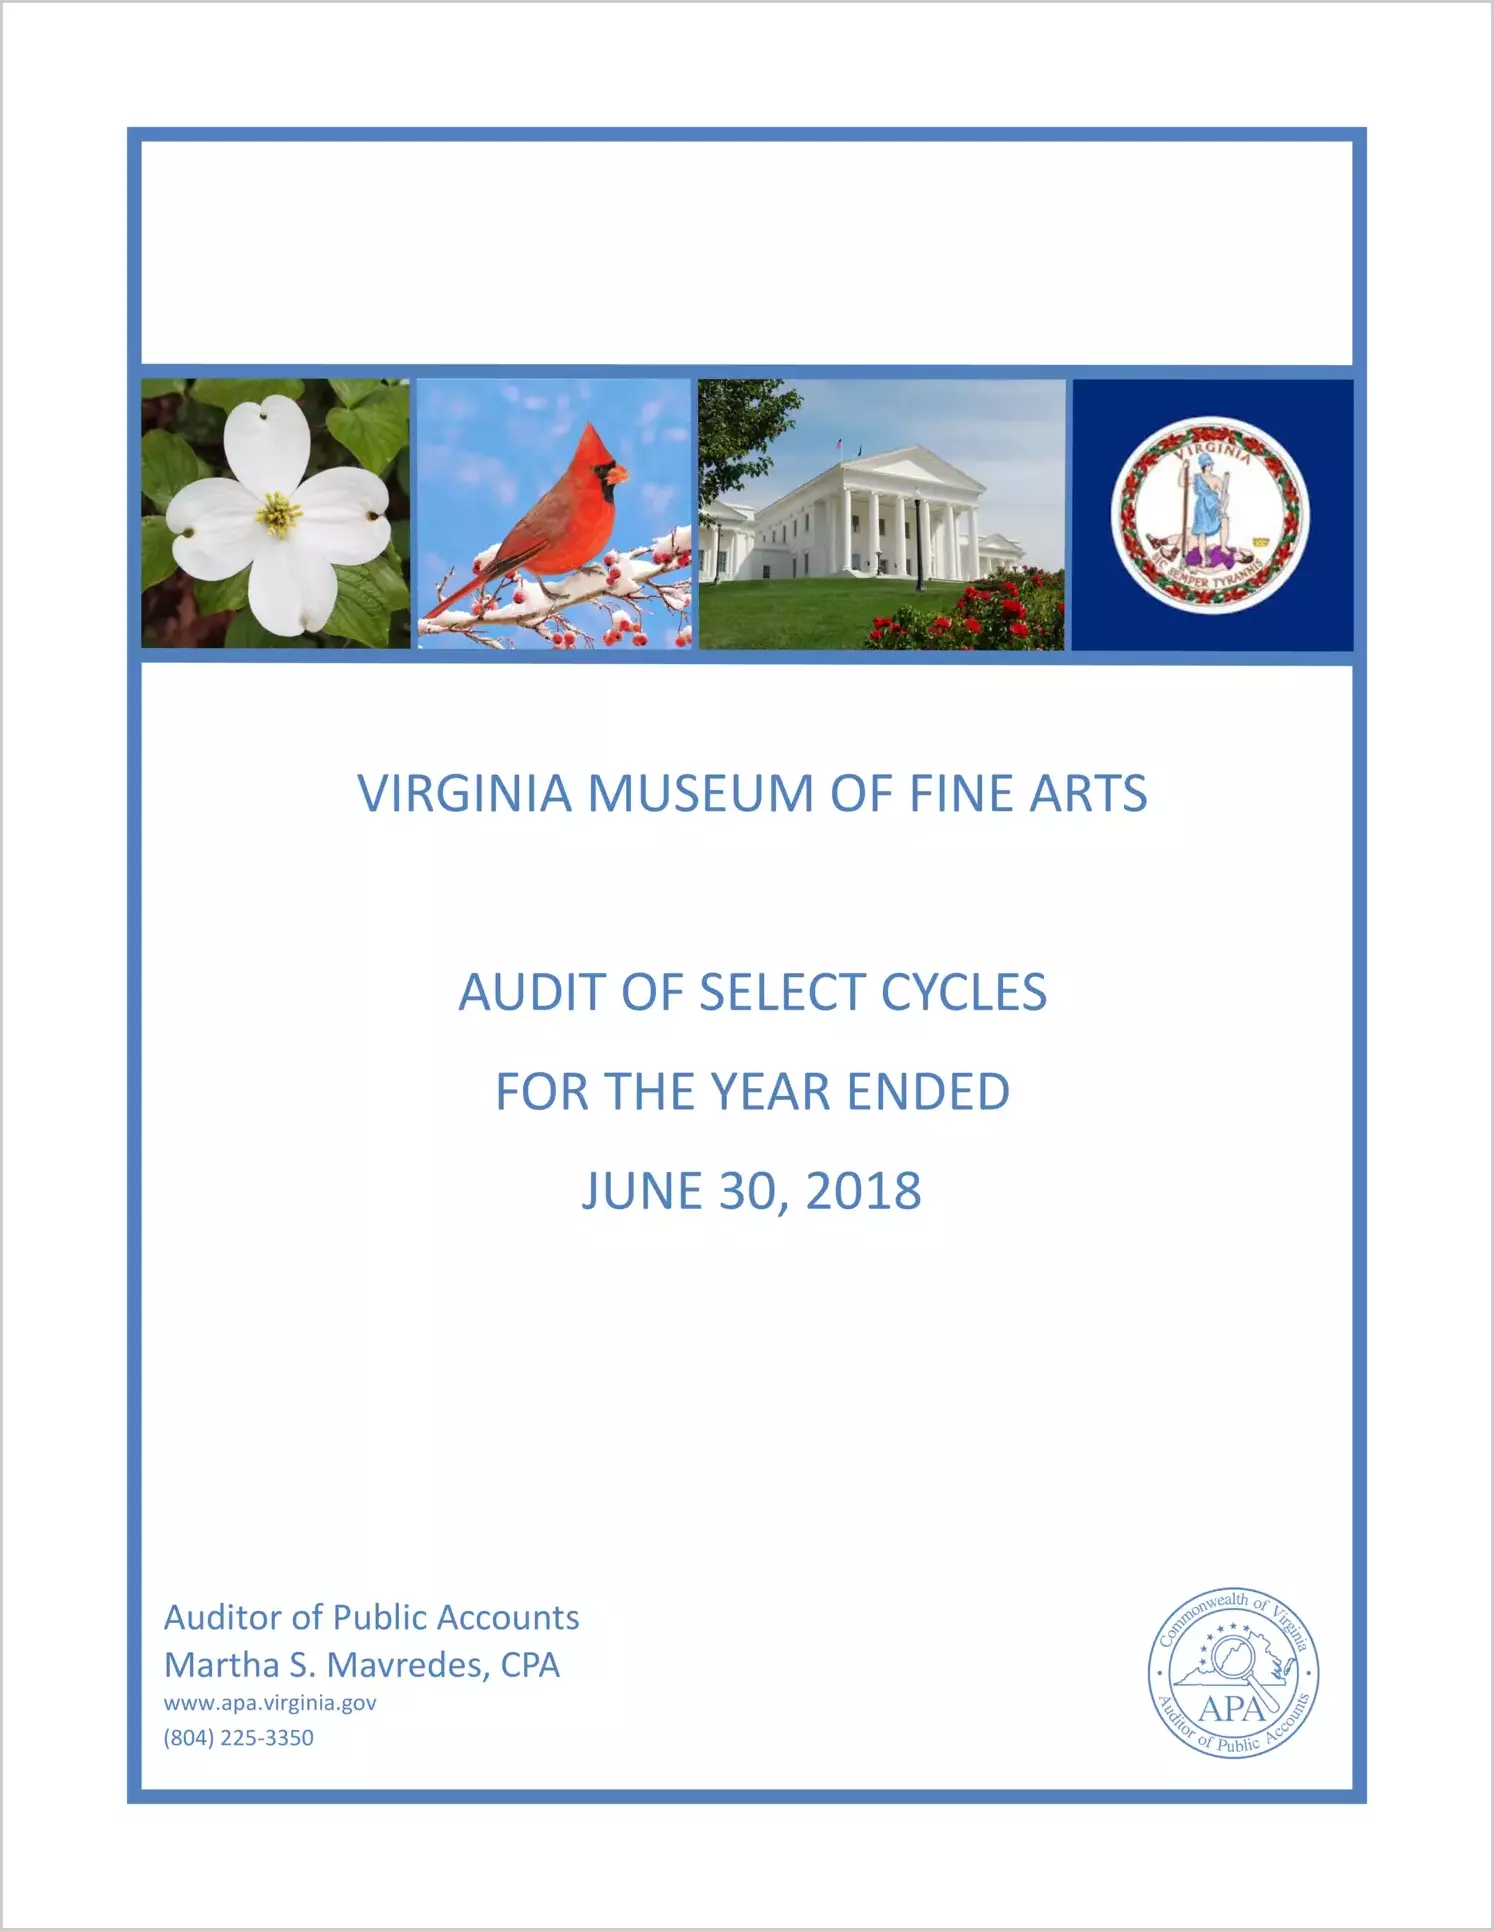 Virginia Museum of Fine Arts Audit of Select Cycles for the year ended June 30, 2018